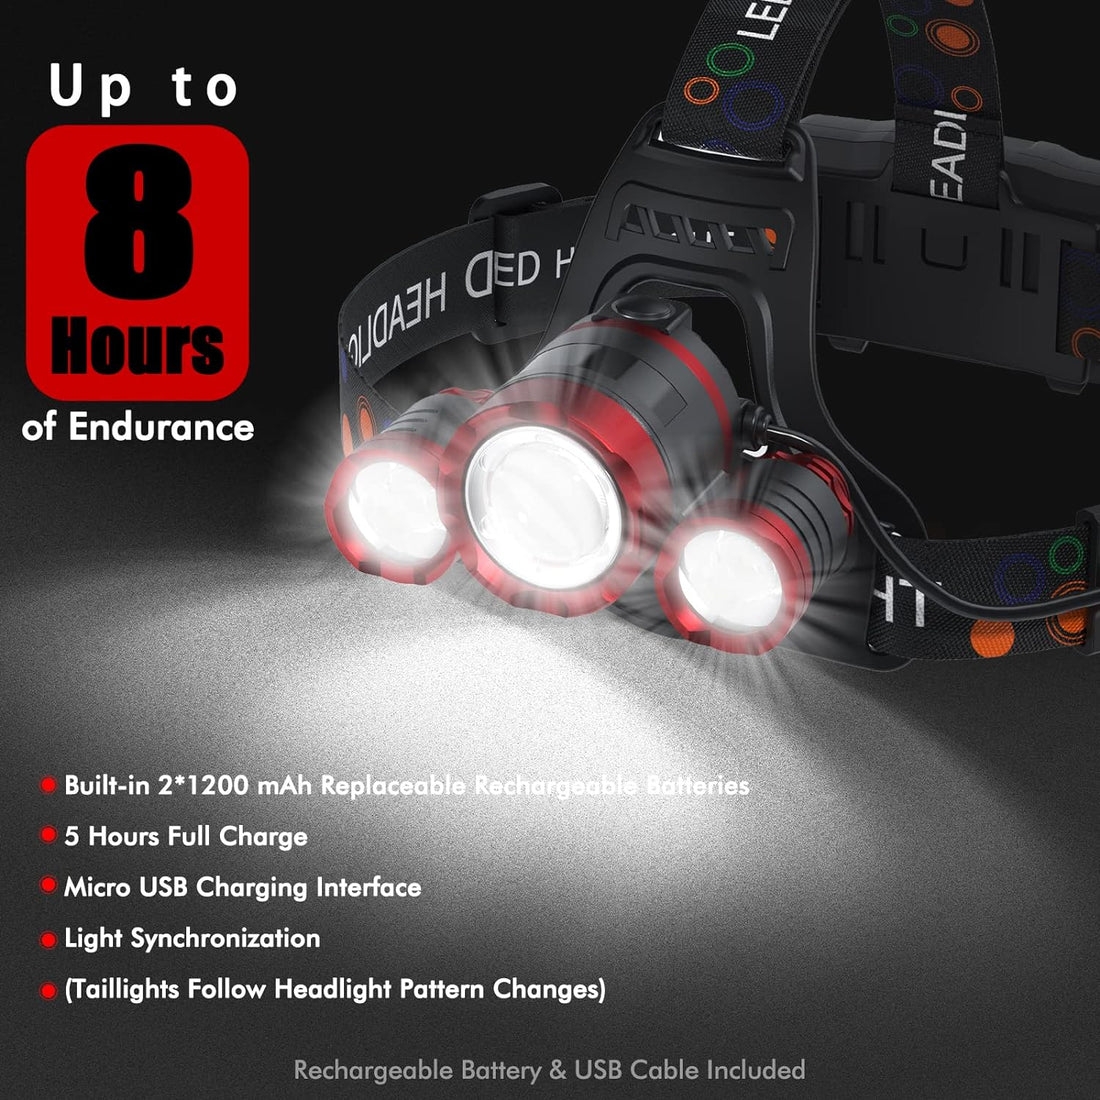 Headlamp Rechargeable Headlamps 6000 High Lumens Super Brightest Head Lamp for Adluts Kids Waterproof Headlight 4 Modes Lightweight Head Lights for Outdoor Camping Hunting Running Hiking Reading(Red)